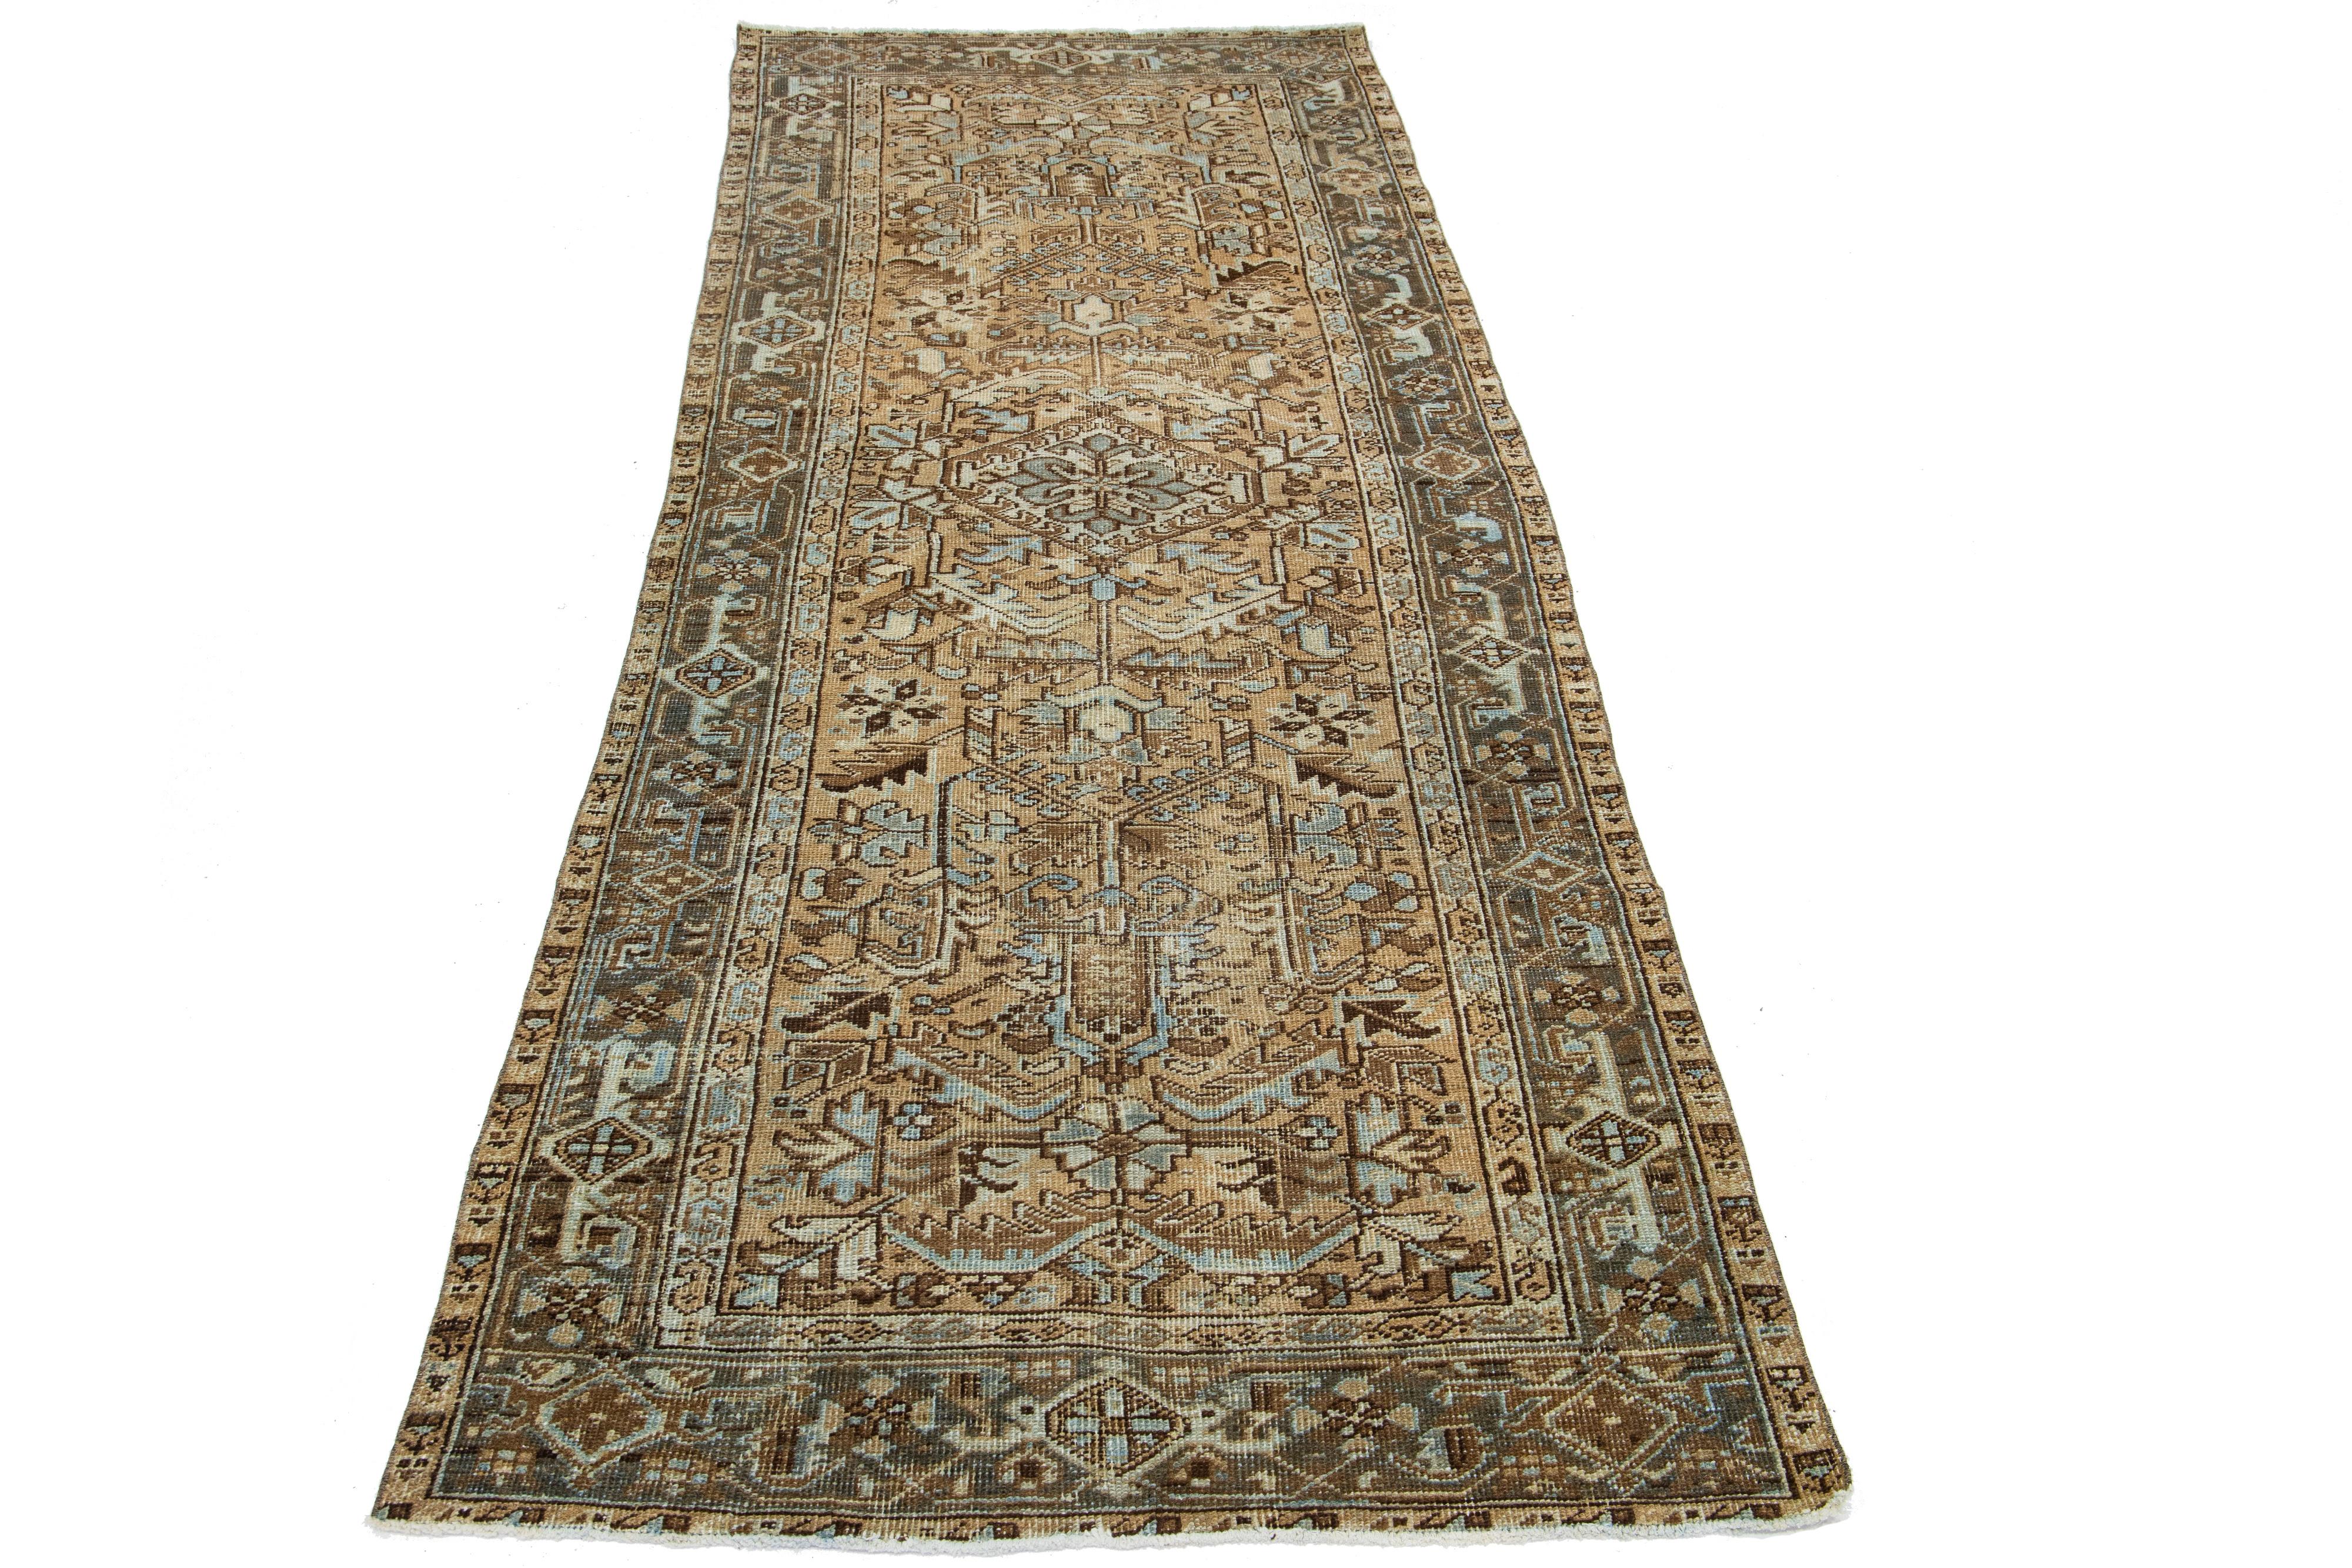 Beautiful 20th-century Heriz hand-knotted wool runner with a brown color field. This Piece has blue accents in a gorgeous tribal design.

This rug measures 3'9